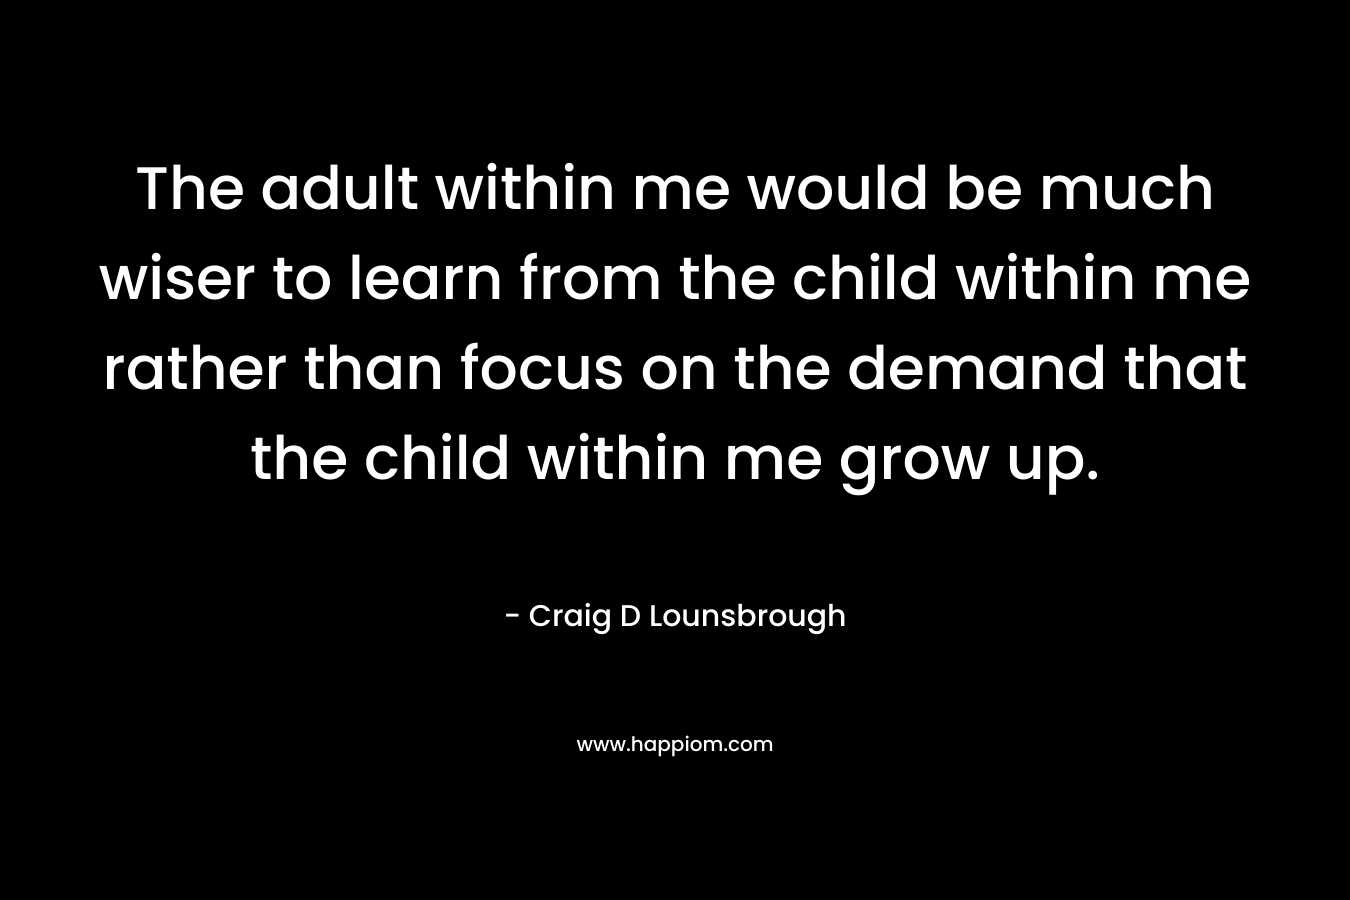 The adult within me would be much wiser to learn from the child within me rather than focus on the demand that the child within me grow up.